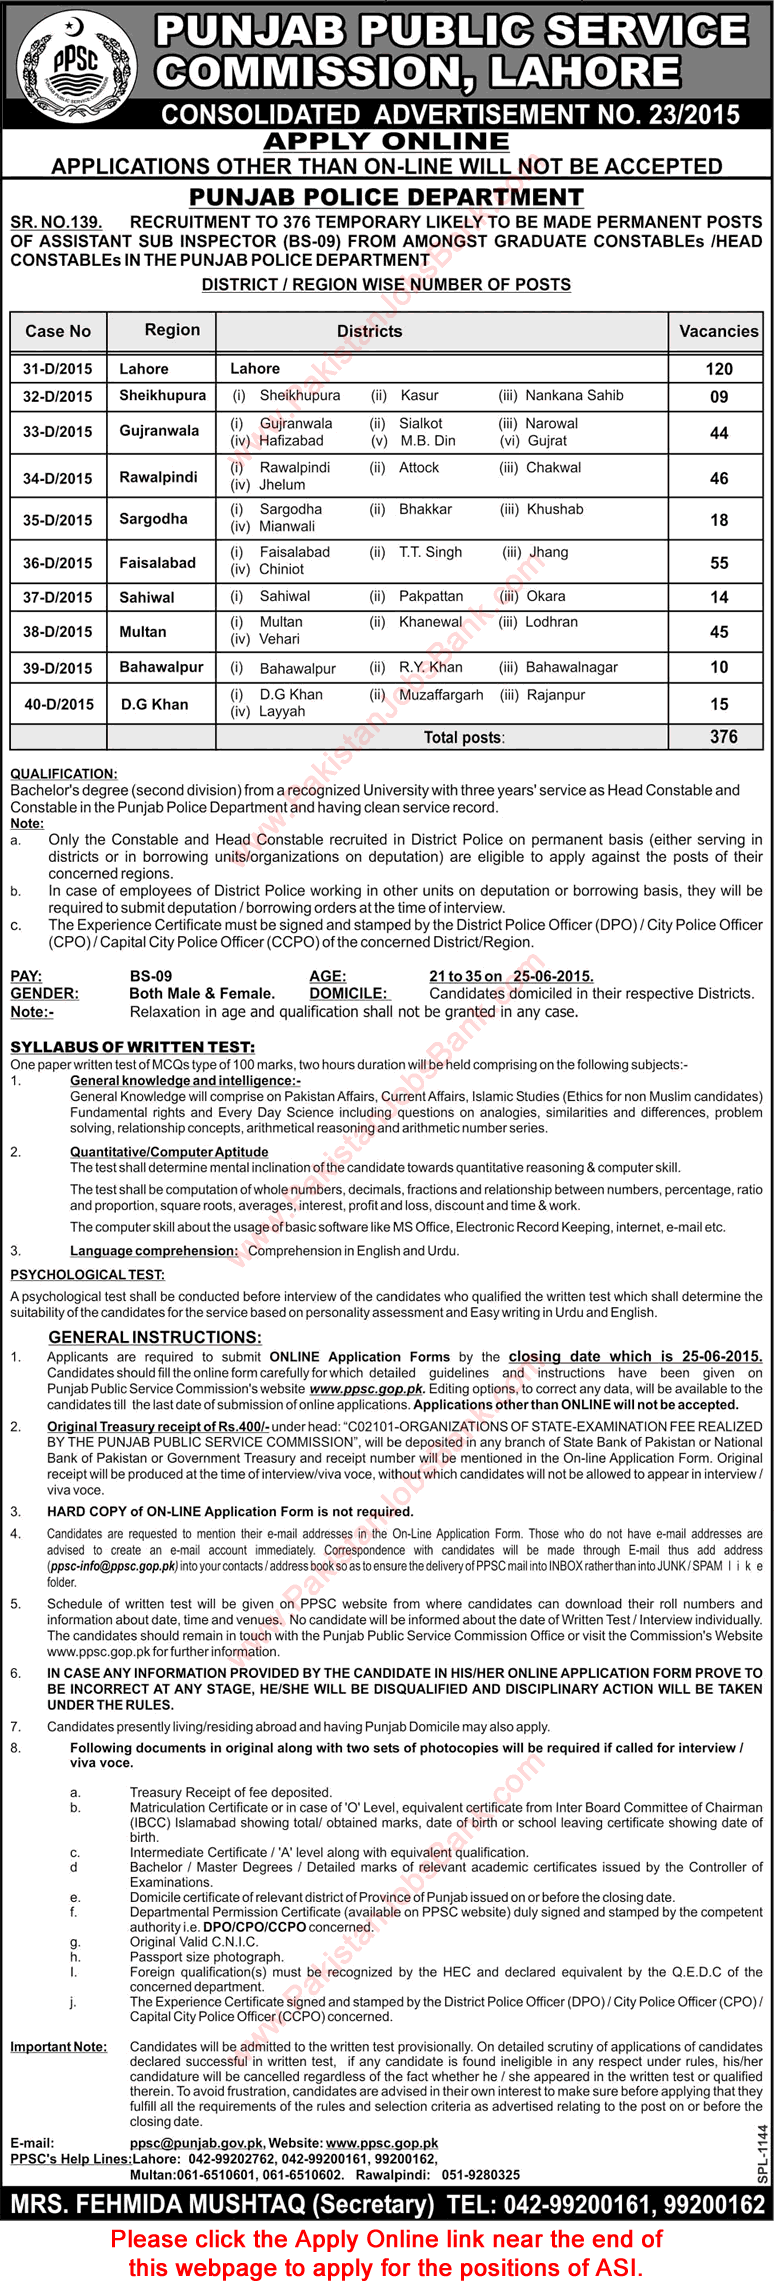 ASI Jobs in Punjab Police June 2015 for Graduate Head / Constables through PPSC Apply Online